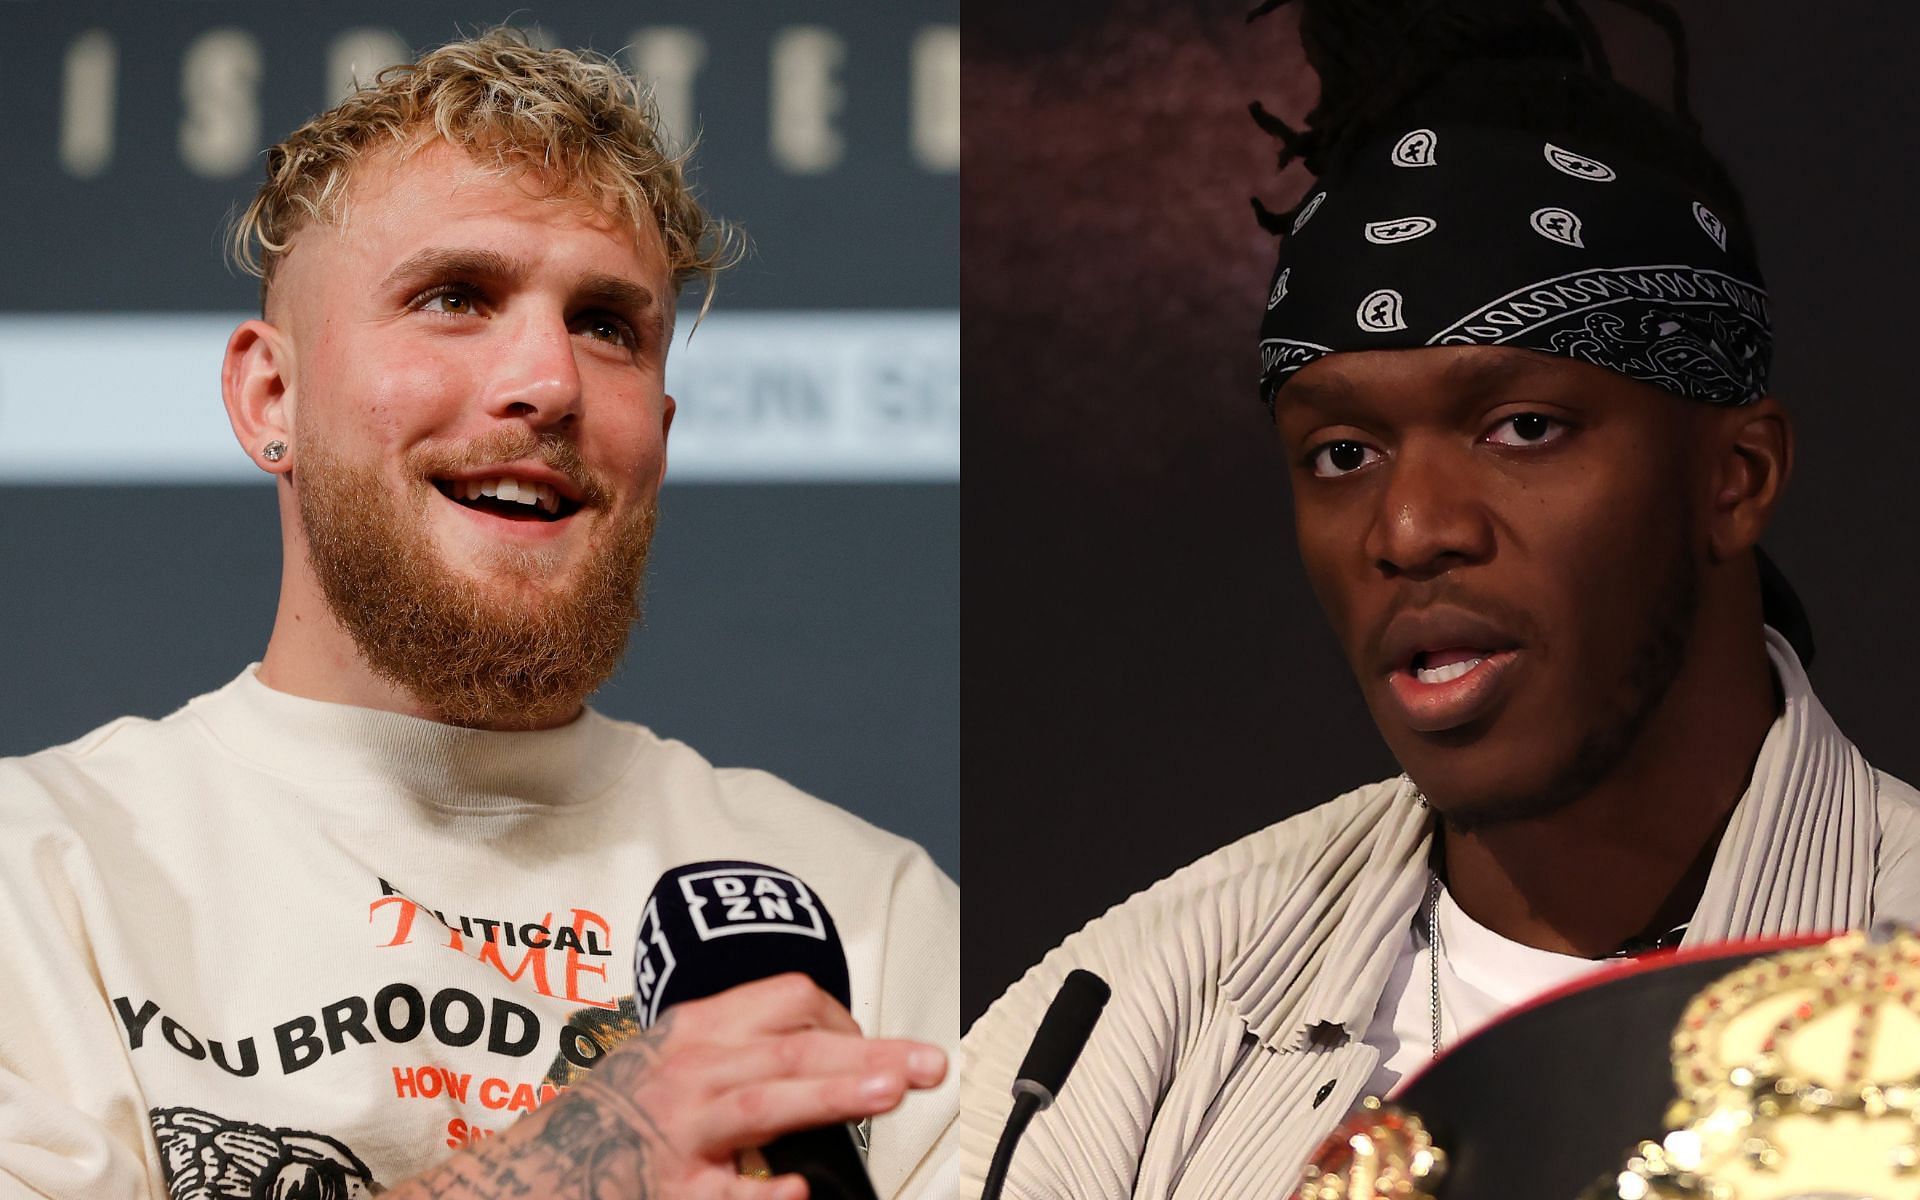 Jake Paul (left) and KSI (right). [via Getty Images]